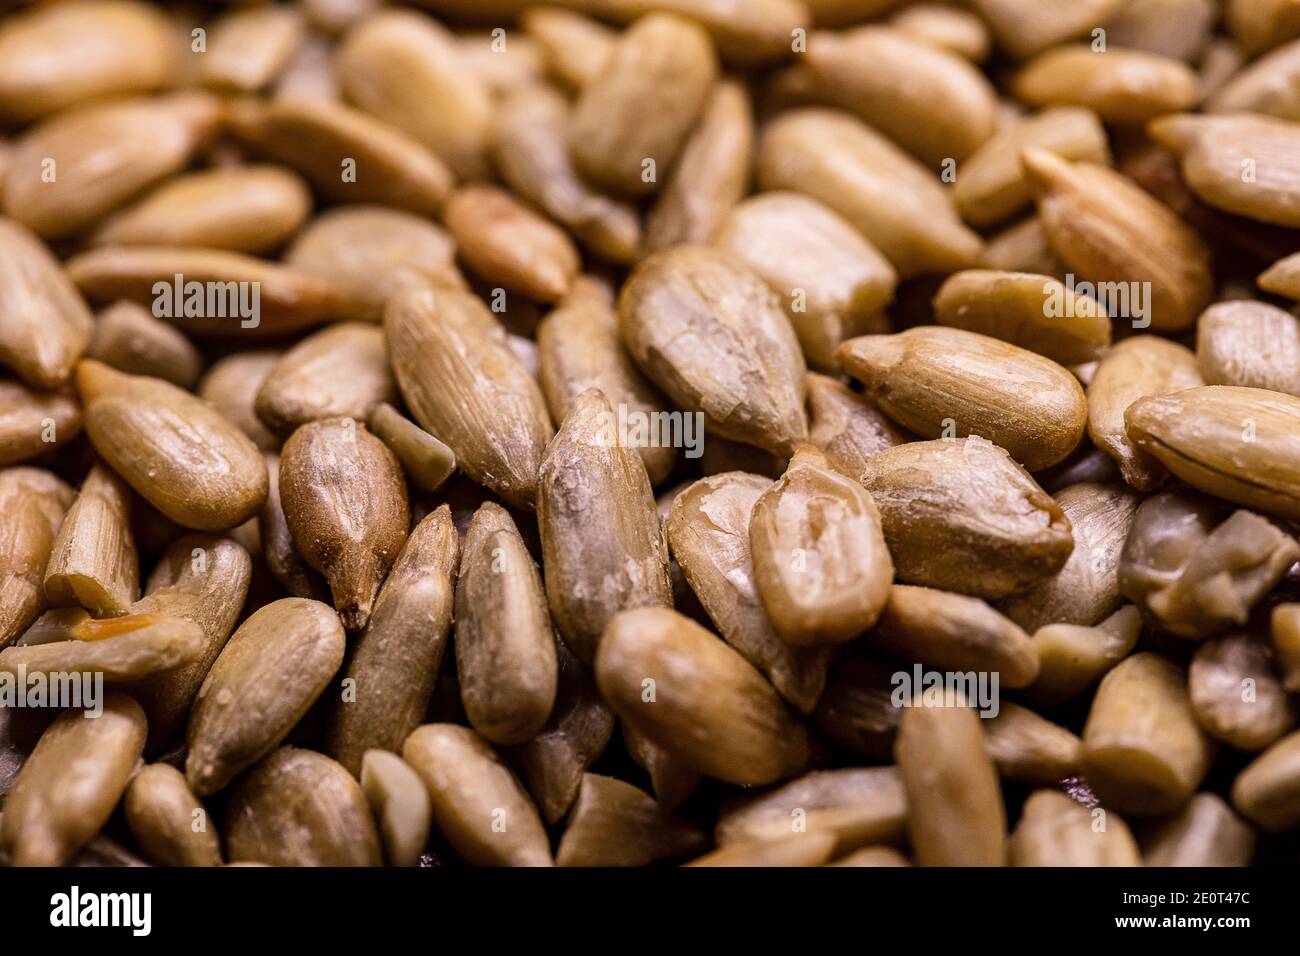 Sunflower Seeds for snacking or cooking, salads or just as a mixer in Trail Mix. Stock Photo